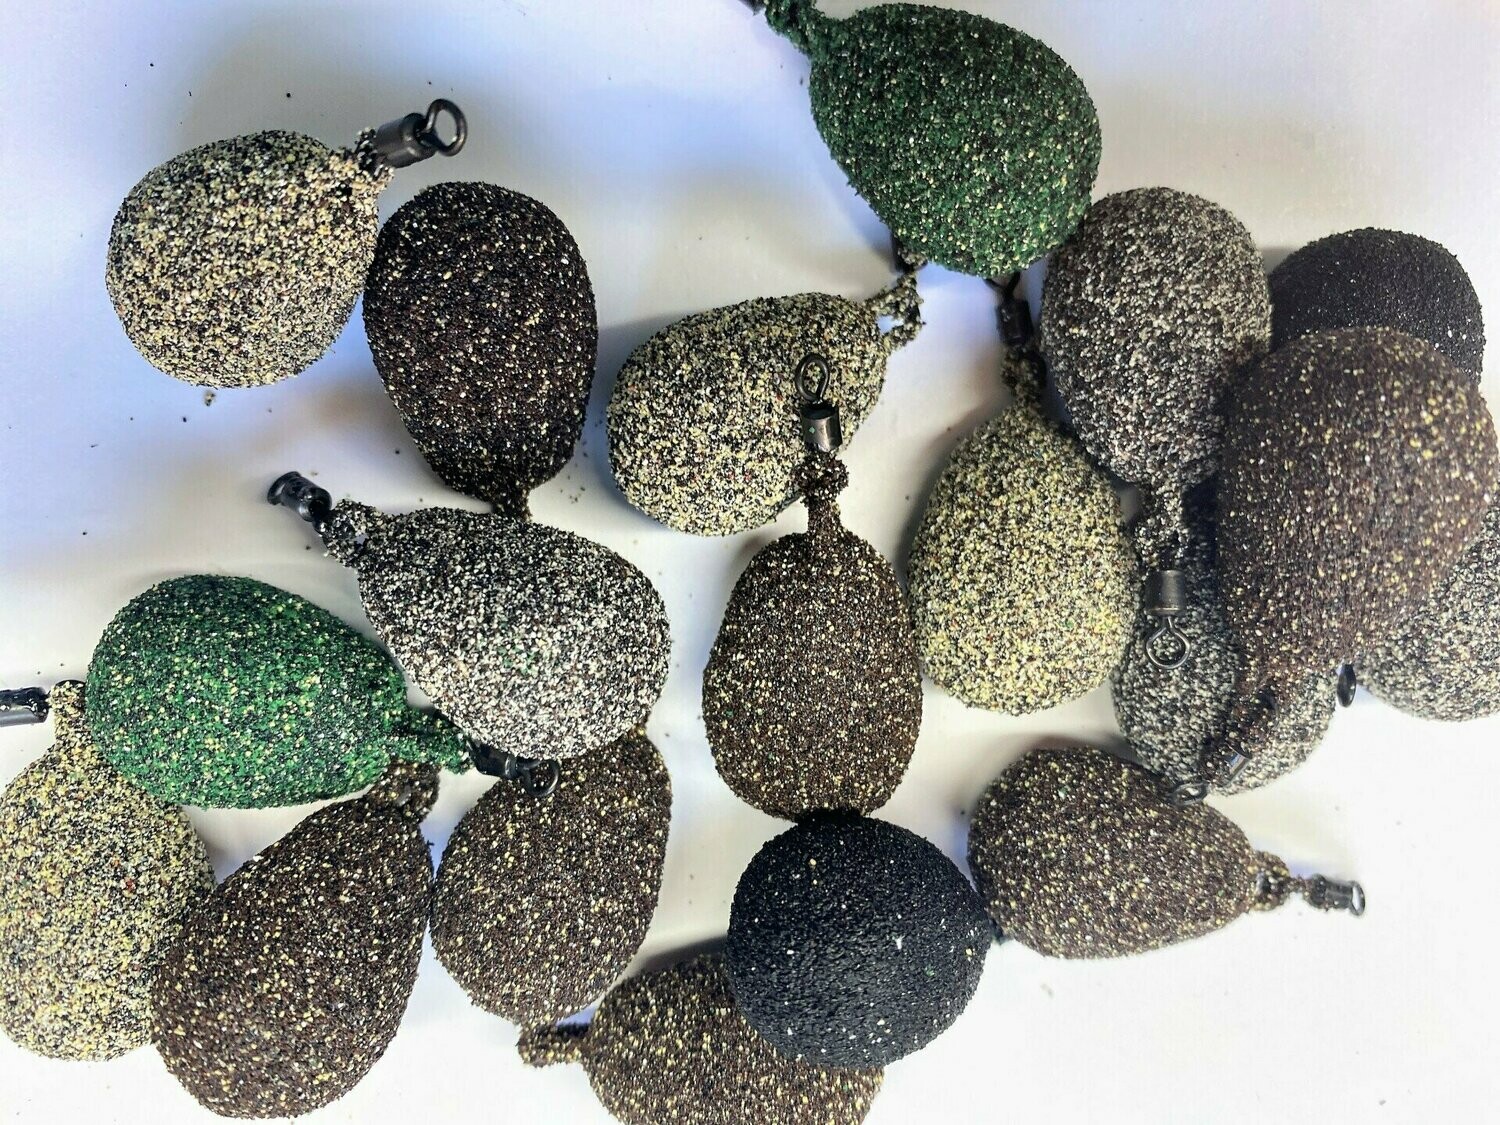 Gravel LEAD WEIGHTS SINKERS textured smooth or uncoated Sea//Carp fishing tackle.